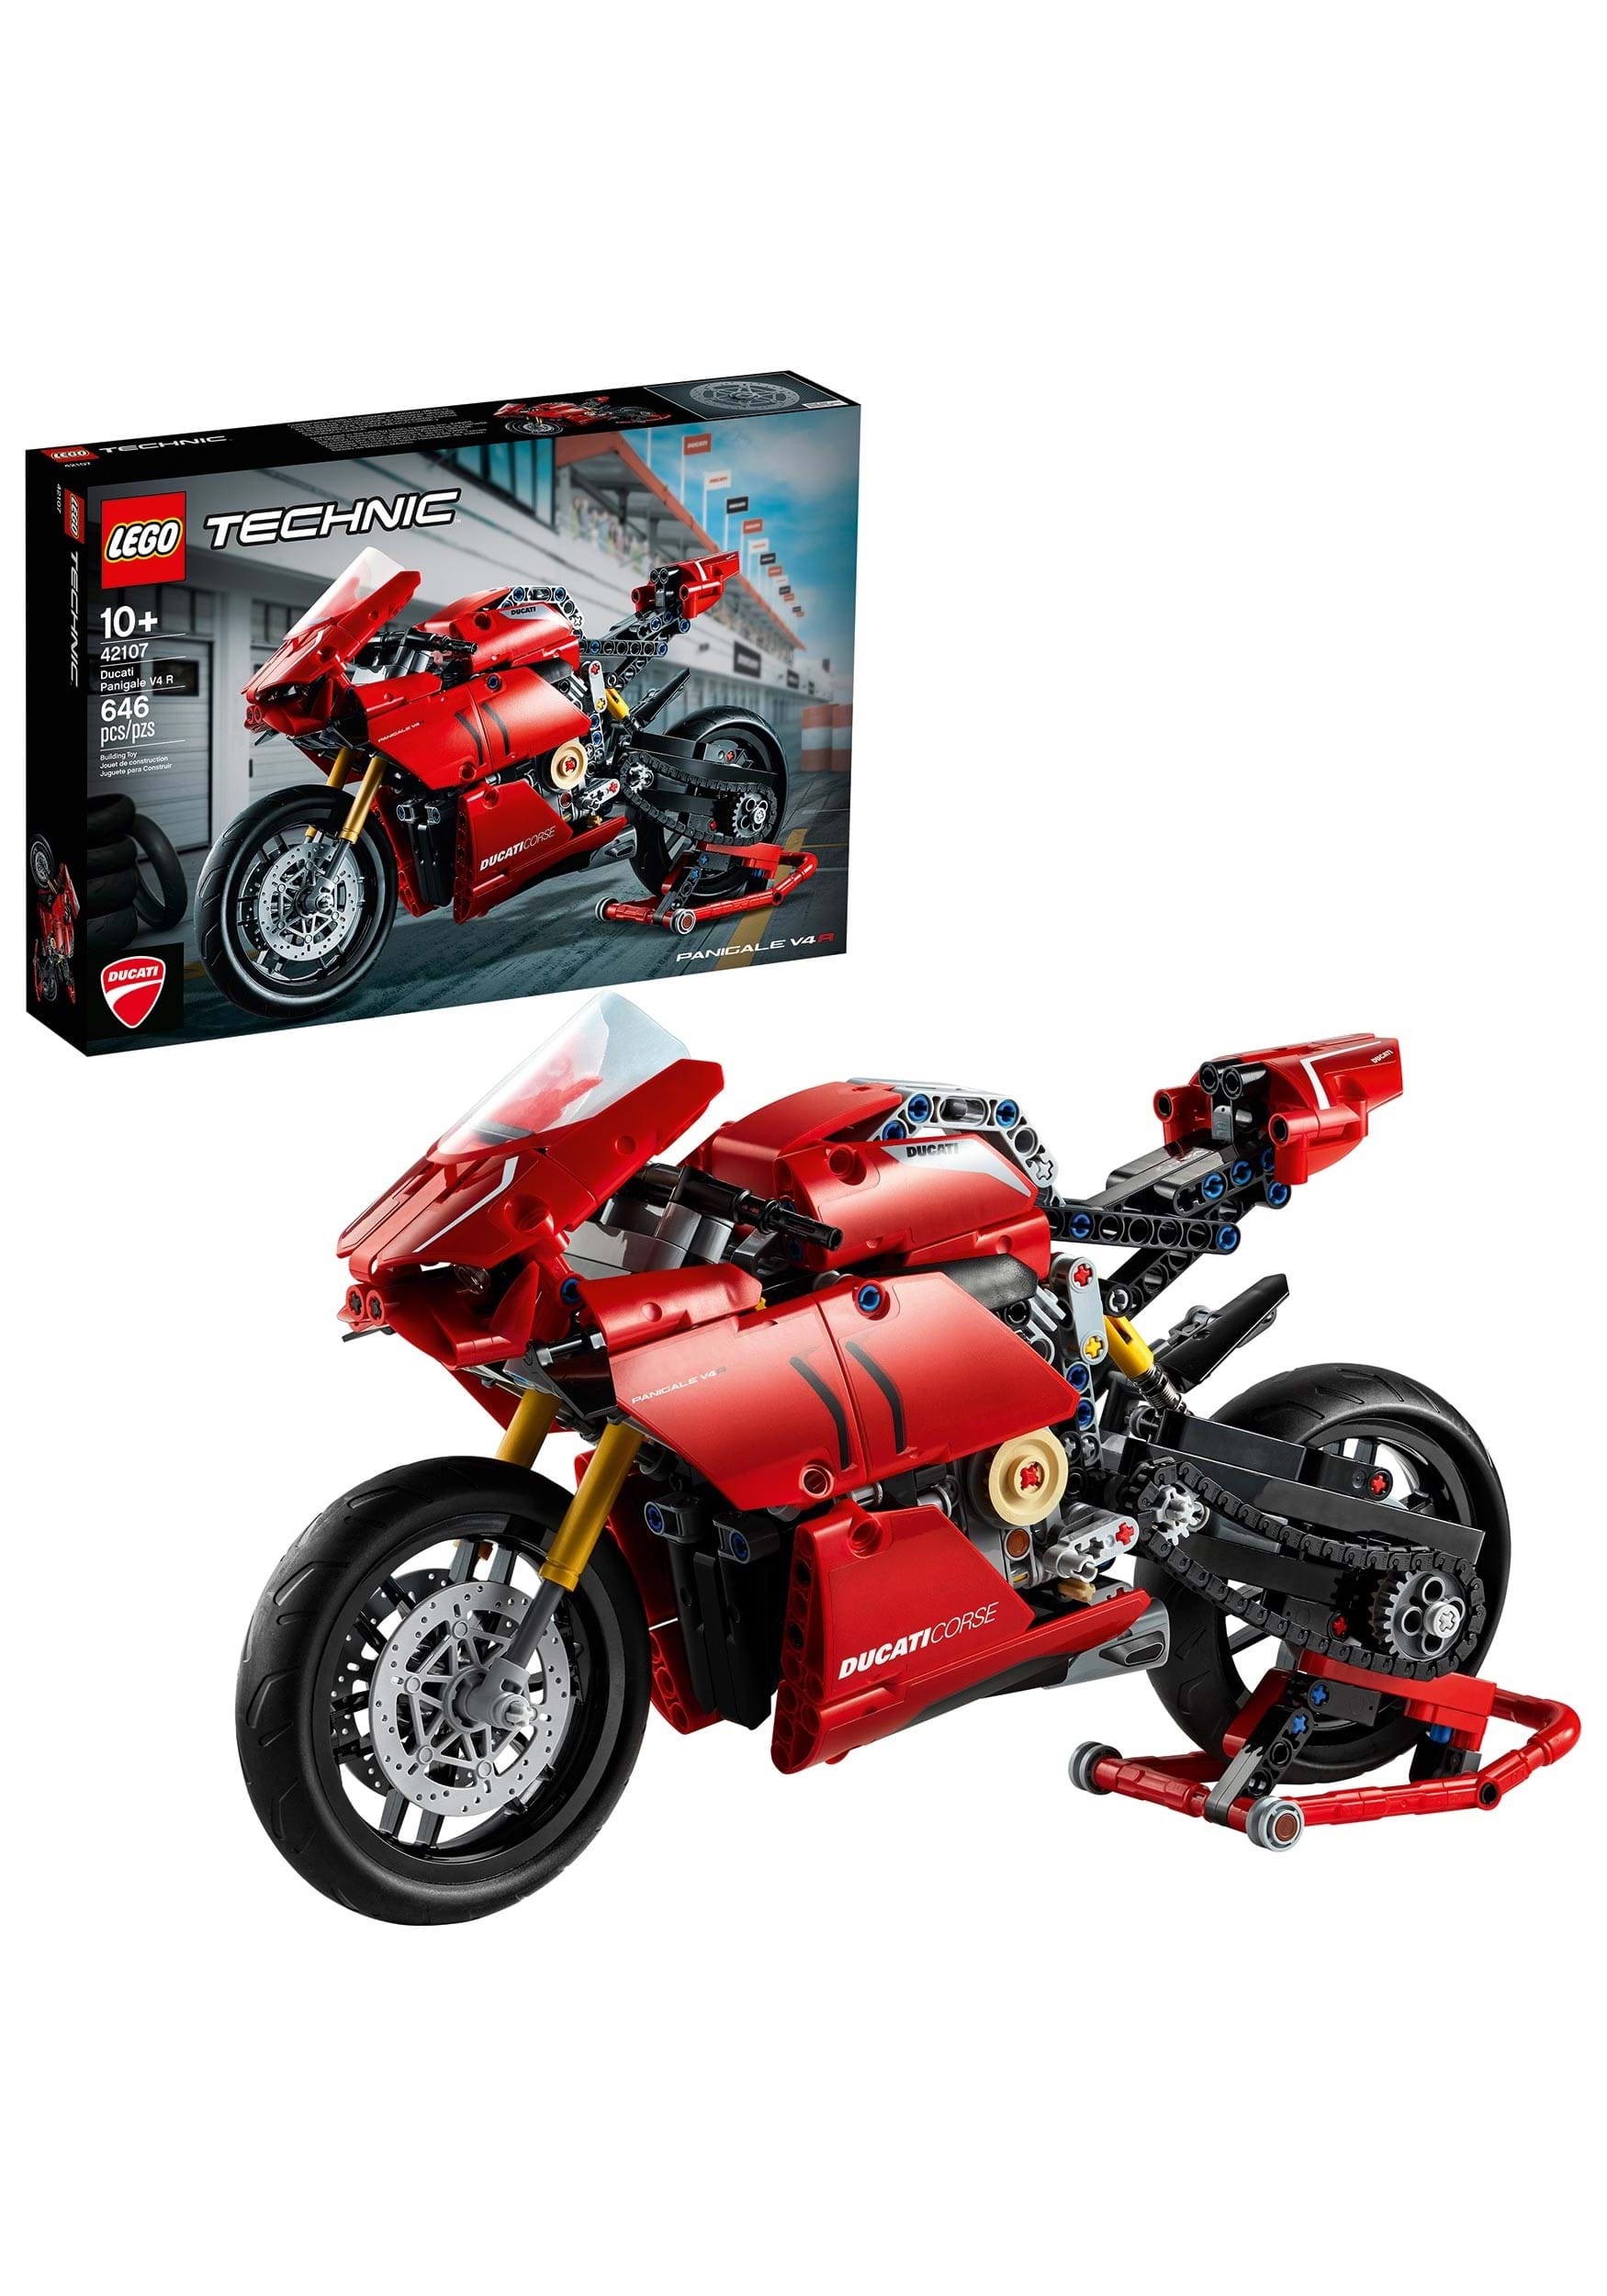 LEGO Ducati Panigale V4 R Motorcycle Building Set